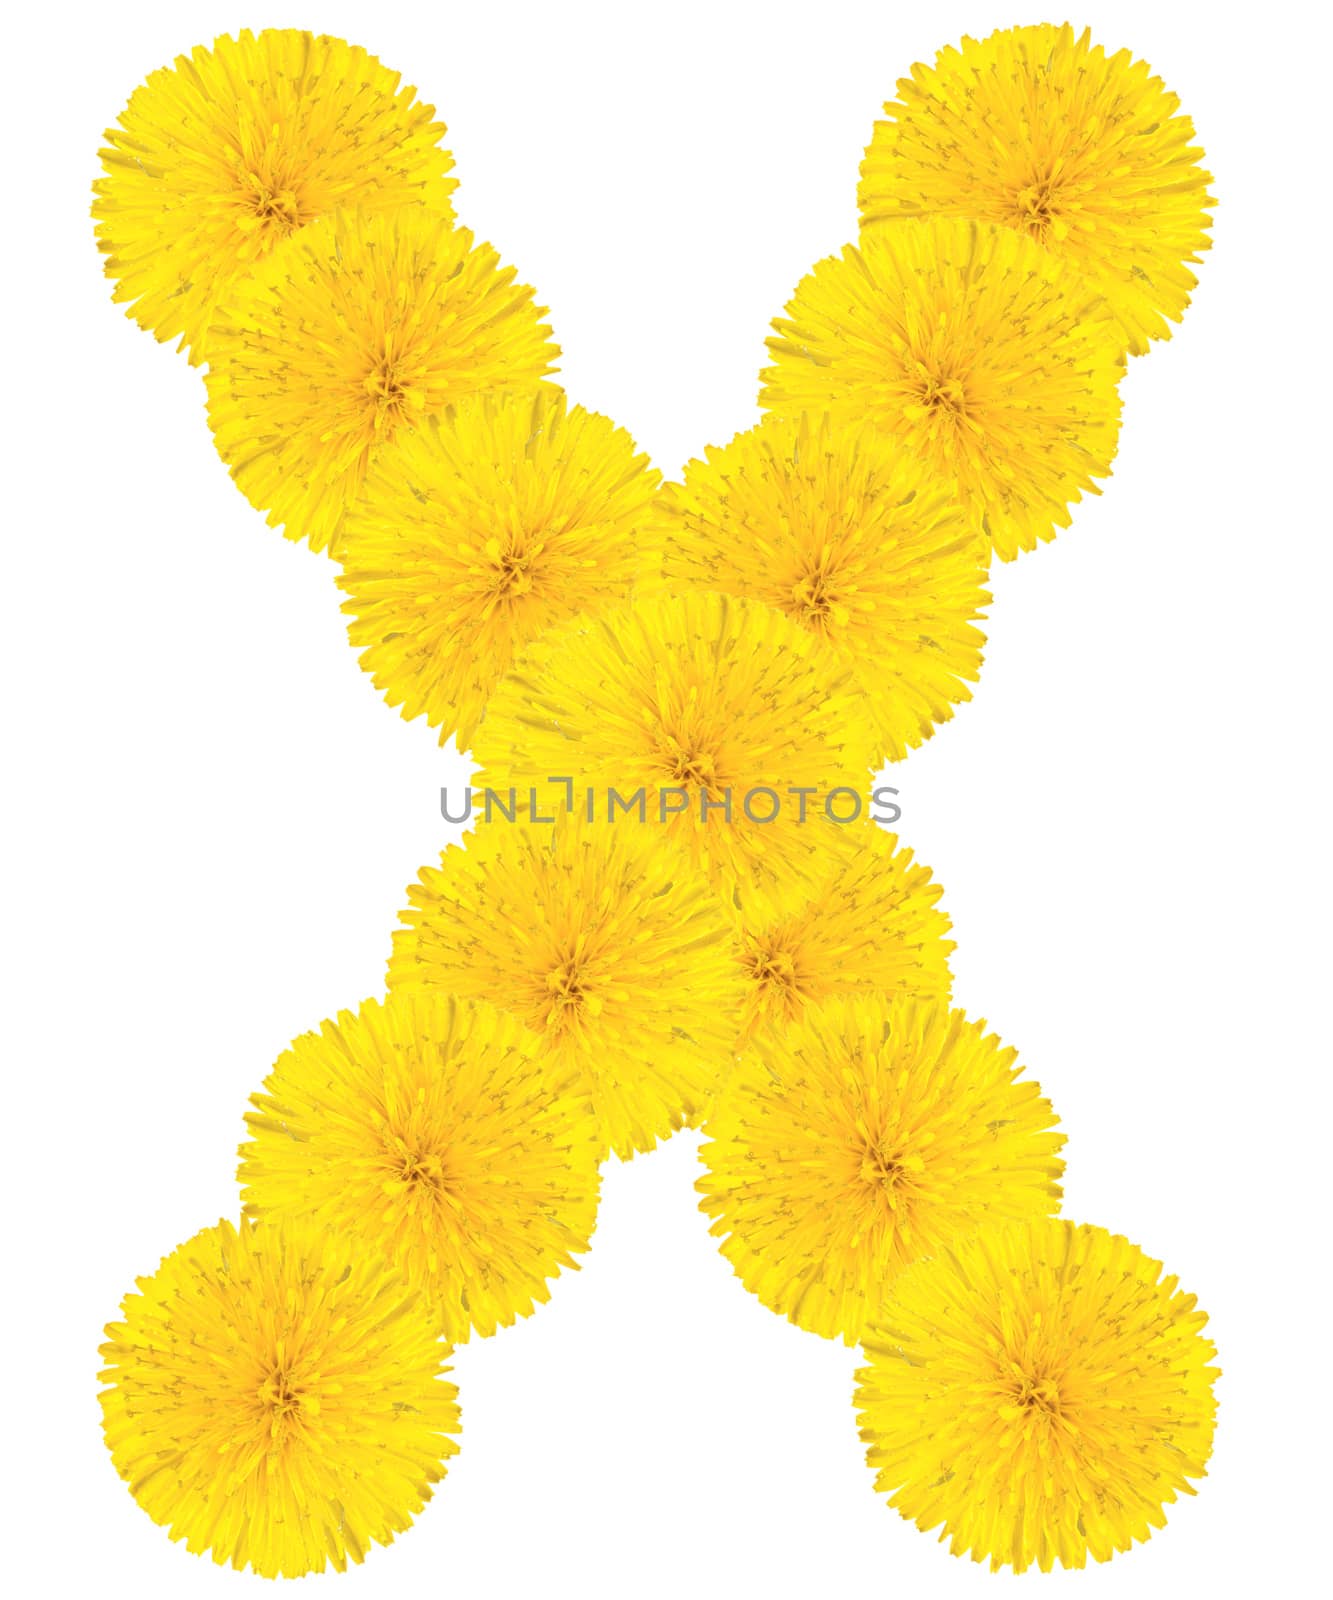 Letter X made from dandelions by Valengilda